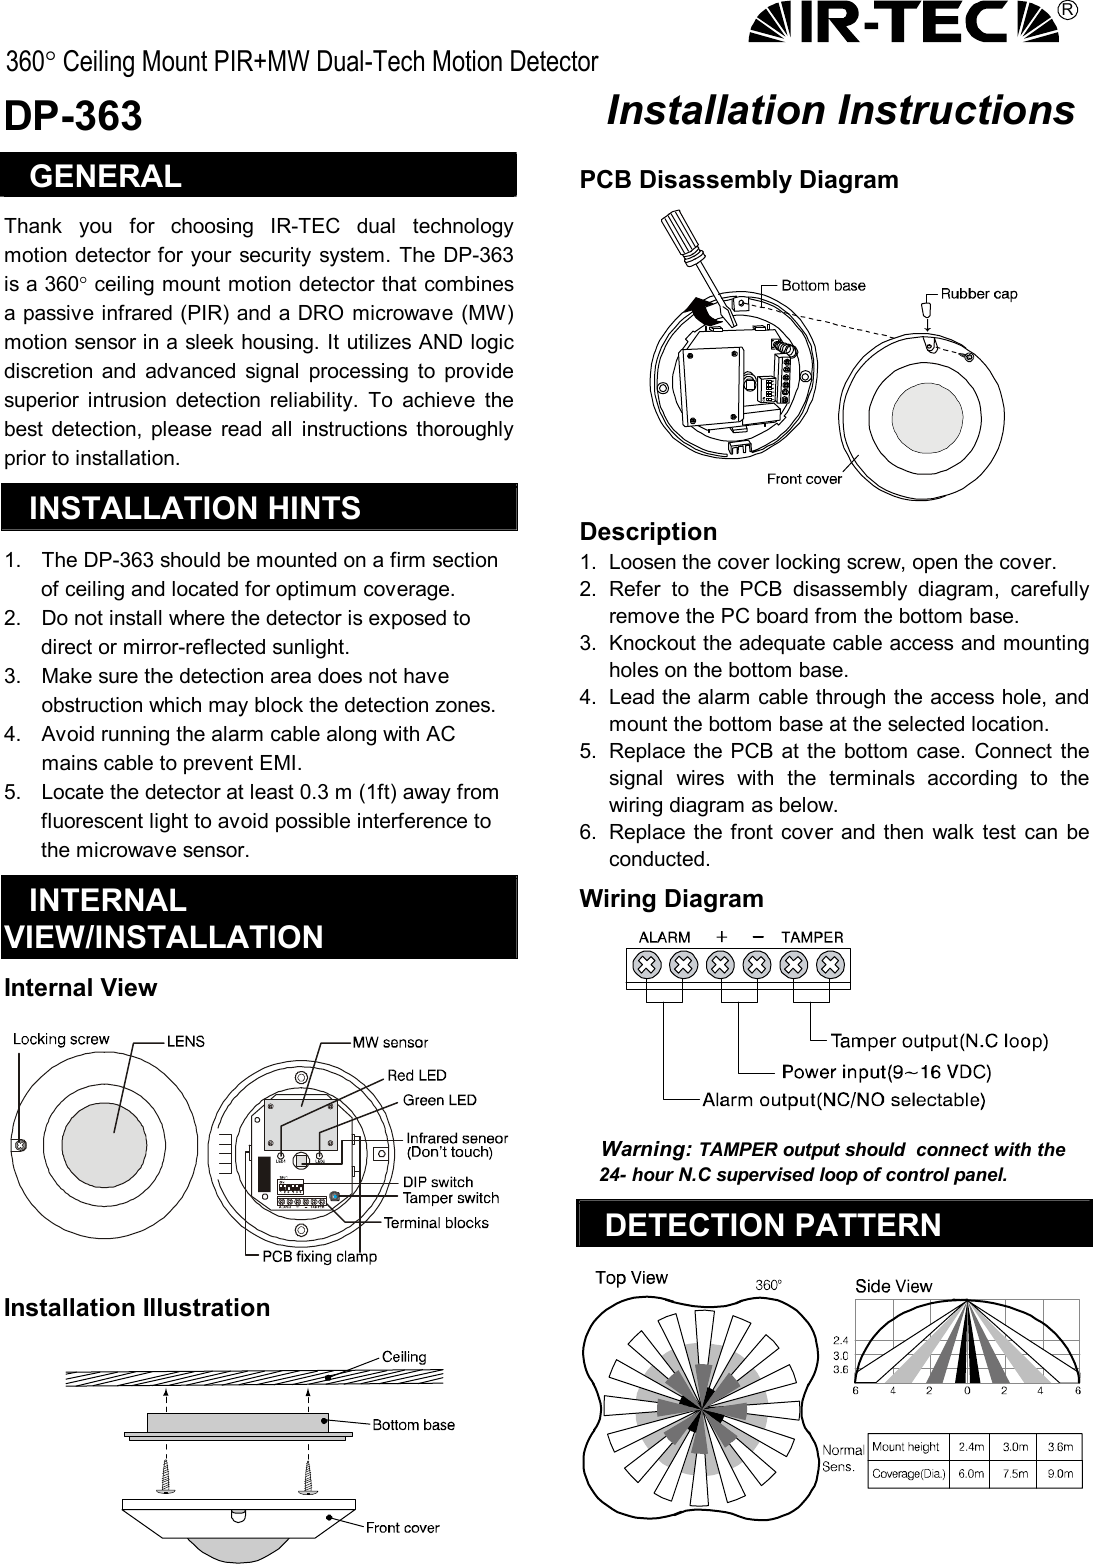 R 360° Ceiling Mount PIR+MW Dual-Tech Motion Detector  DP-363  Installation Instructions  GENERAL Thank you for choosing IR-TEC dual technology motion detector for your security system. The DP-363 is a 360° ceiling mount motion detector that combines a passive infrared (PIR) and a DRO microwave (MW) motion sensor in a sleek housing. It utilizes AND logic discretion and advanced signal processing to provide superior intrusion detection reliability. To achieve the best detection, please read all instructions thoroughly prior to installation. INSTALLATION HINTS 1. The DP-363 should be mounted on a firm section of ceiling and located for optimum coverage. 2. Do not install where the detector is exposed to direct or mirror-reflected sunlight. 3. Make sure the detection area does not have obstruction which may block the detection zones. 4. Avoid running the alarm cable along with AC mains cable to prevent EMI. 5. Locate the detector at least 0.3 m (1ft) away from fluorescent light to avoid possible interference to the microwave sensor. INTERNAL VIEW/INSTALLATION Internal View  Installation Illustration  PCB Disassembly Diagram  Description 1. Loosen the cover locking screw, open the cover. 2. Refer to the PCB disassembly diagram, carefully remove the PC board from the bottom base. 3. Knockout the adequate cable access and mounting holes on the bottom base. 4. Lead the alarm cable through the access hole, and mount the bottom base at the selected location.  5. Replace the PCB at the bottom case. Connect the signal wires with the terminals according to the wiring diagram as below. 6. Replace the front cover and then walk test can be conducted.  Wiring Diagram   Warning: TAMPER output should  connect with the  24- hour N.C supervised loop of control panel. DETECTION PATTERN  